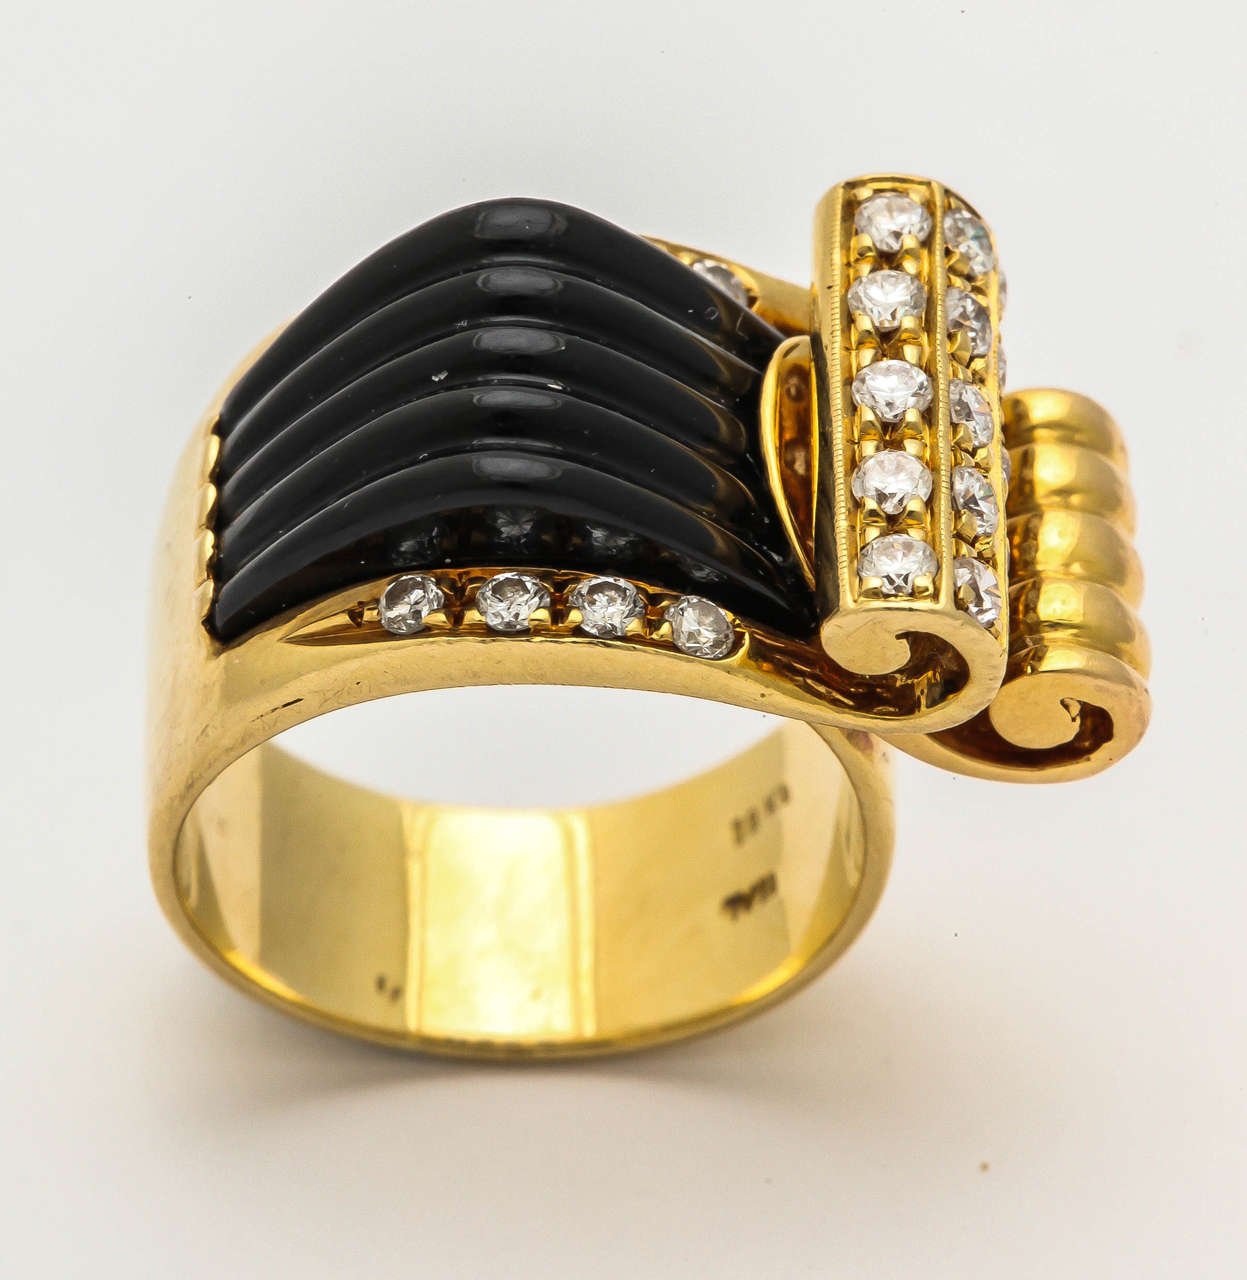 18kt yellow gold high style and architectural carved fluted onyx ridges cocktail ring consisting of an unusual curly cue gold design embellished with numerous full cut diamonds thruout the design of the ring Made In Italy Circa 1960's